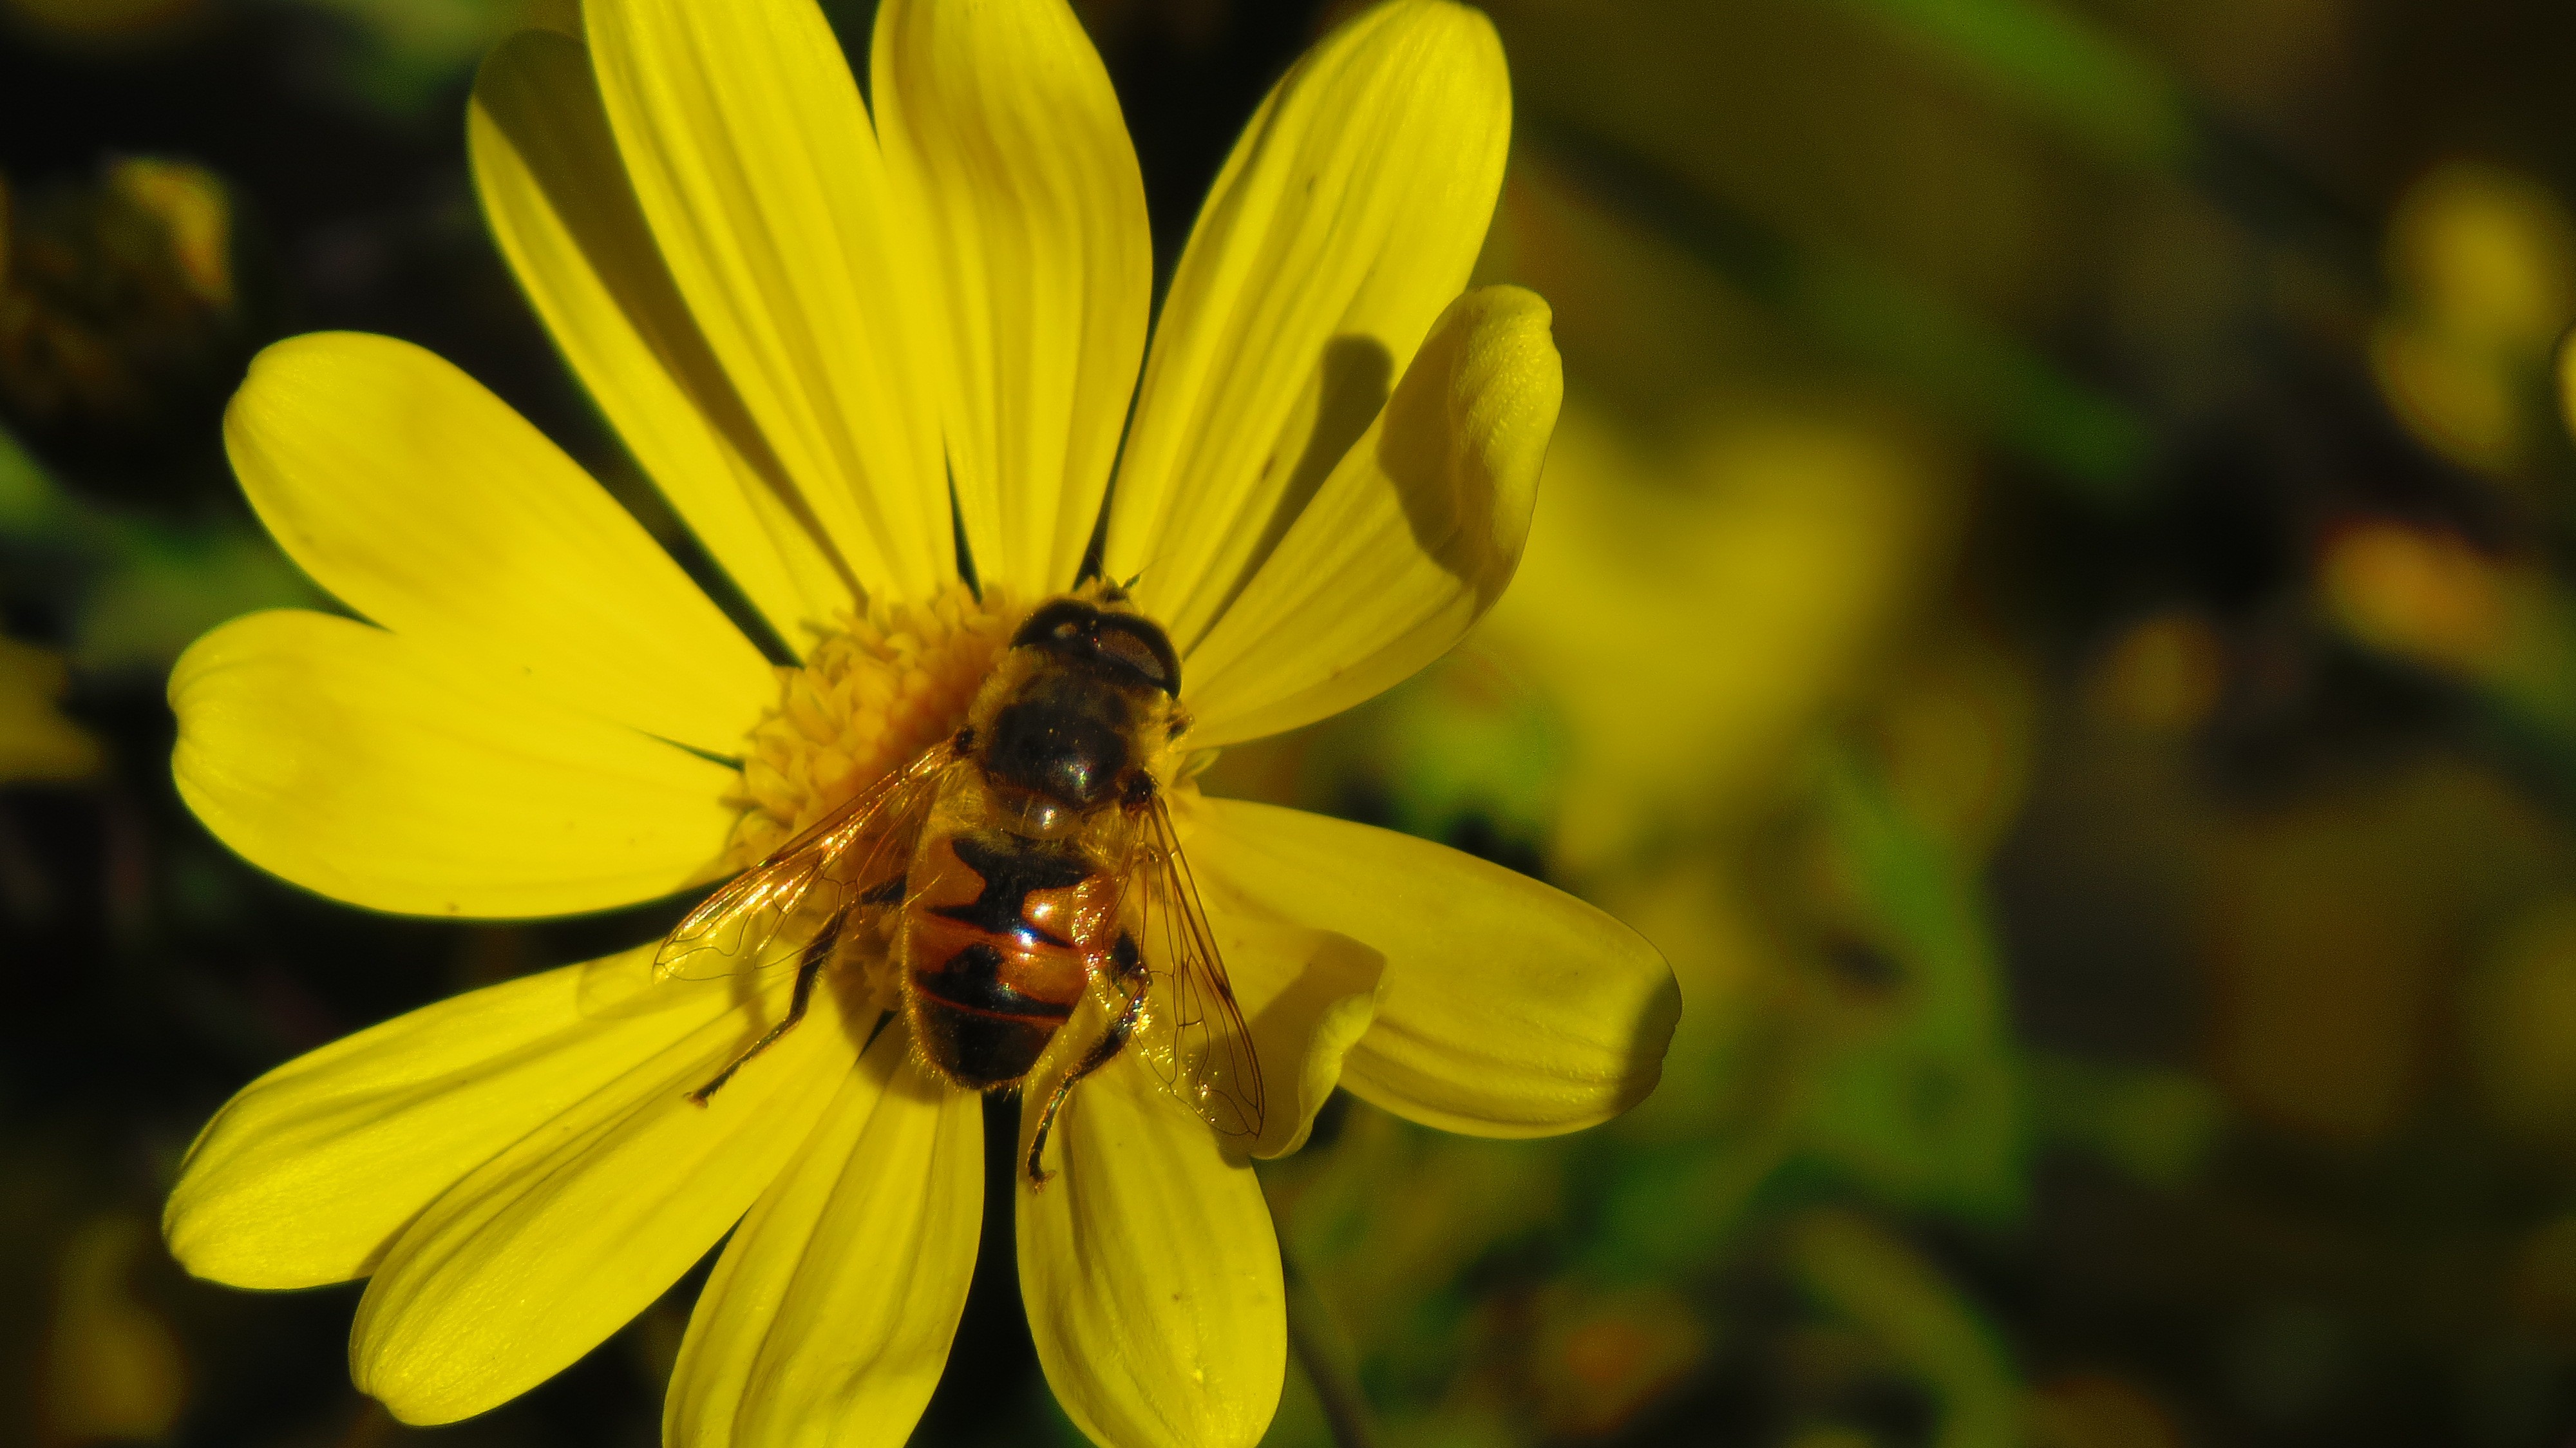 General 4000x2248 flowers yellow flowers nature animals insect closeup plants flowerflies